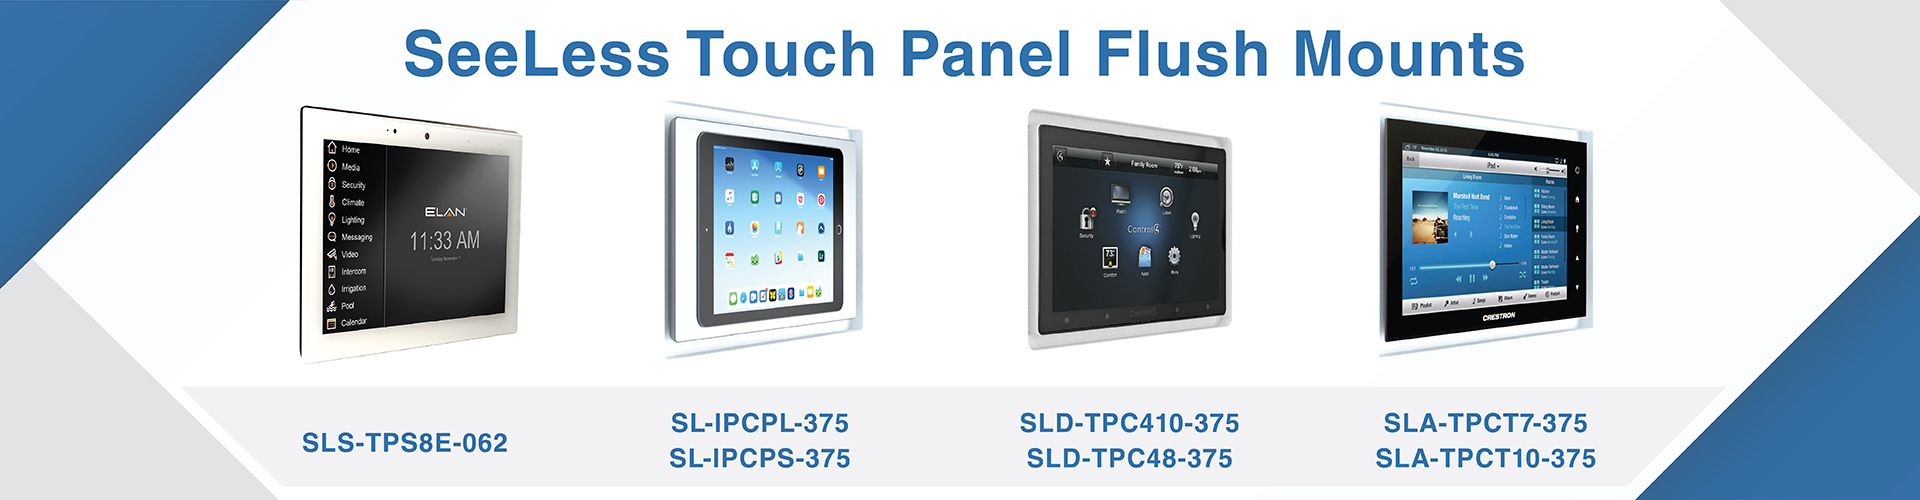 Touch Panels Mud-In Platforms